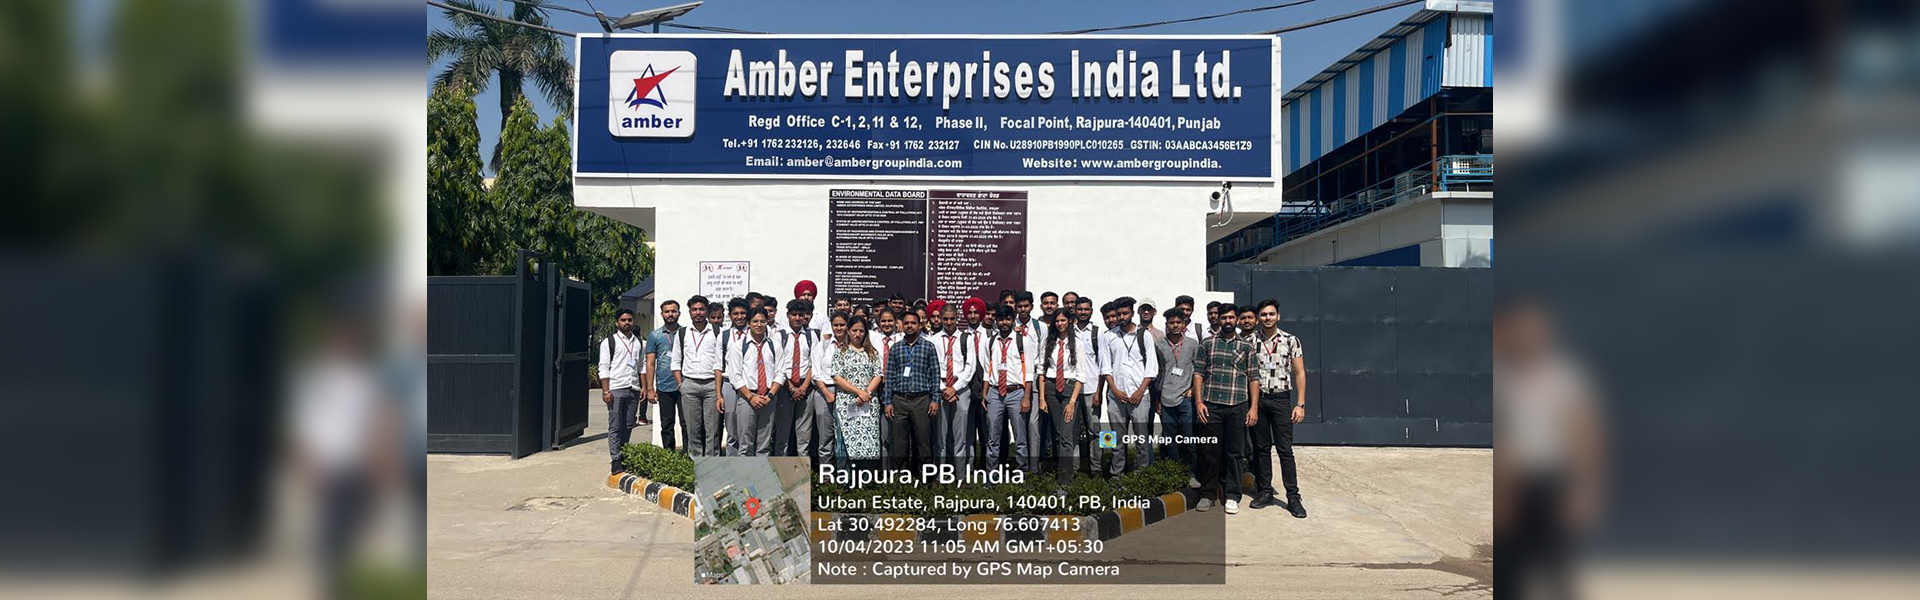 Industrial visit to Amber Group 